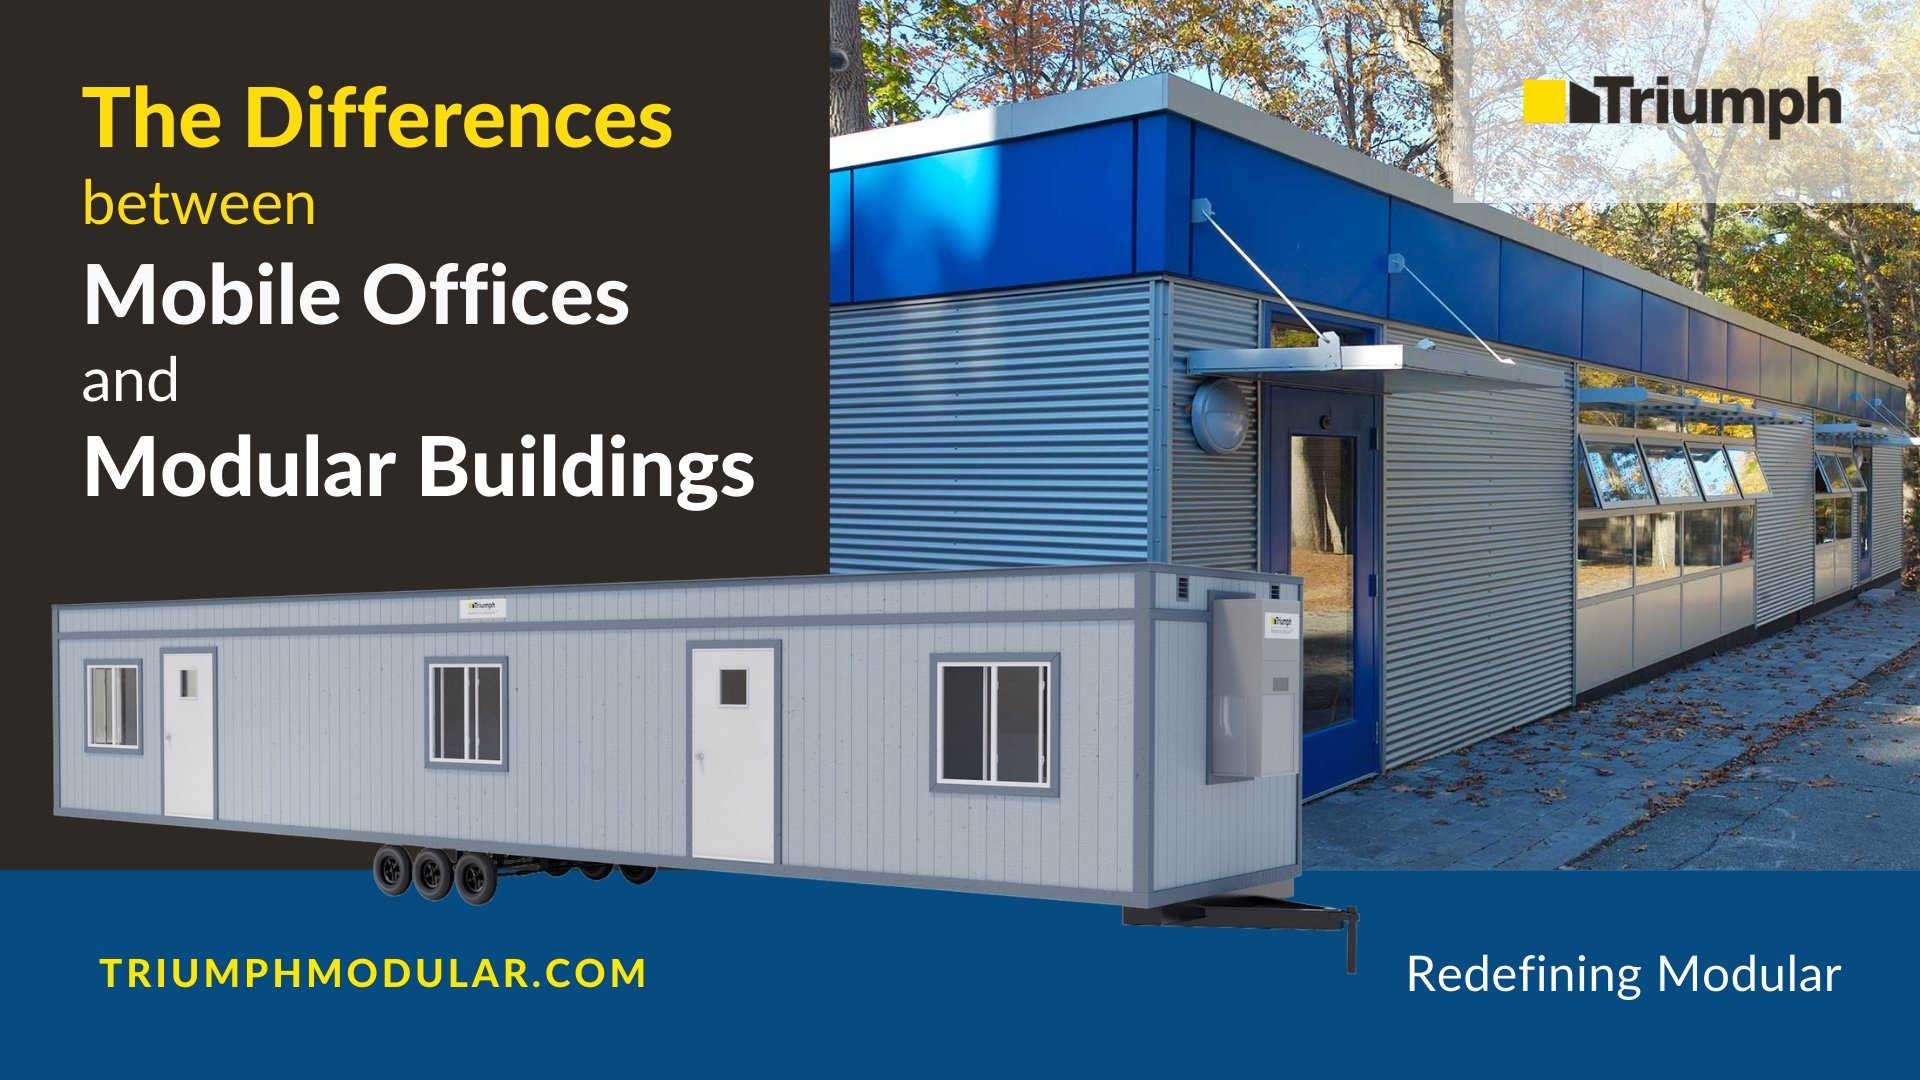 featured image for mobile offices vs modular buildings article